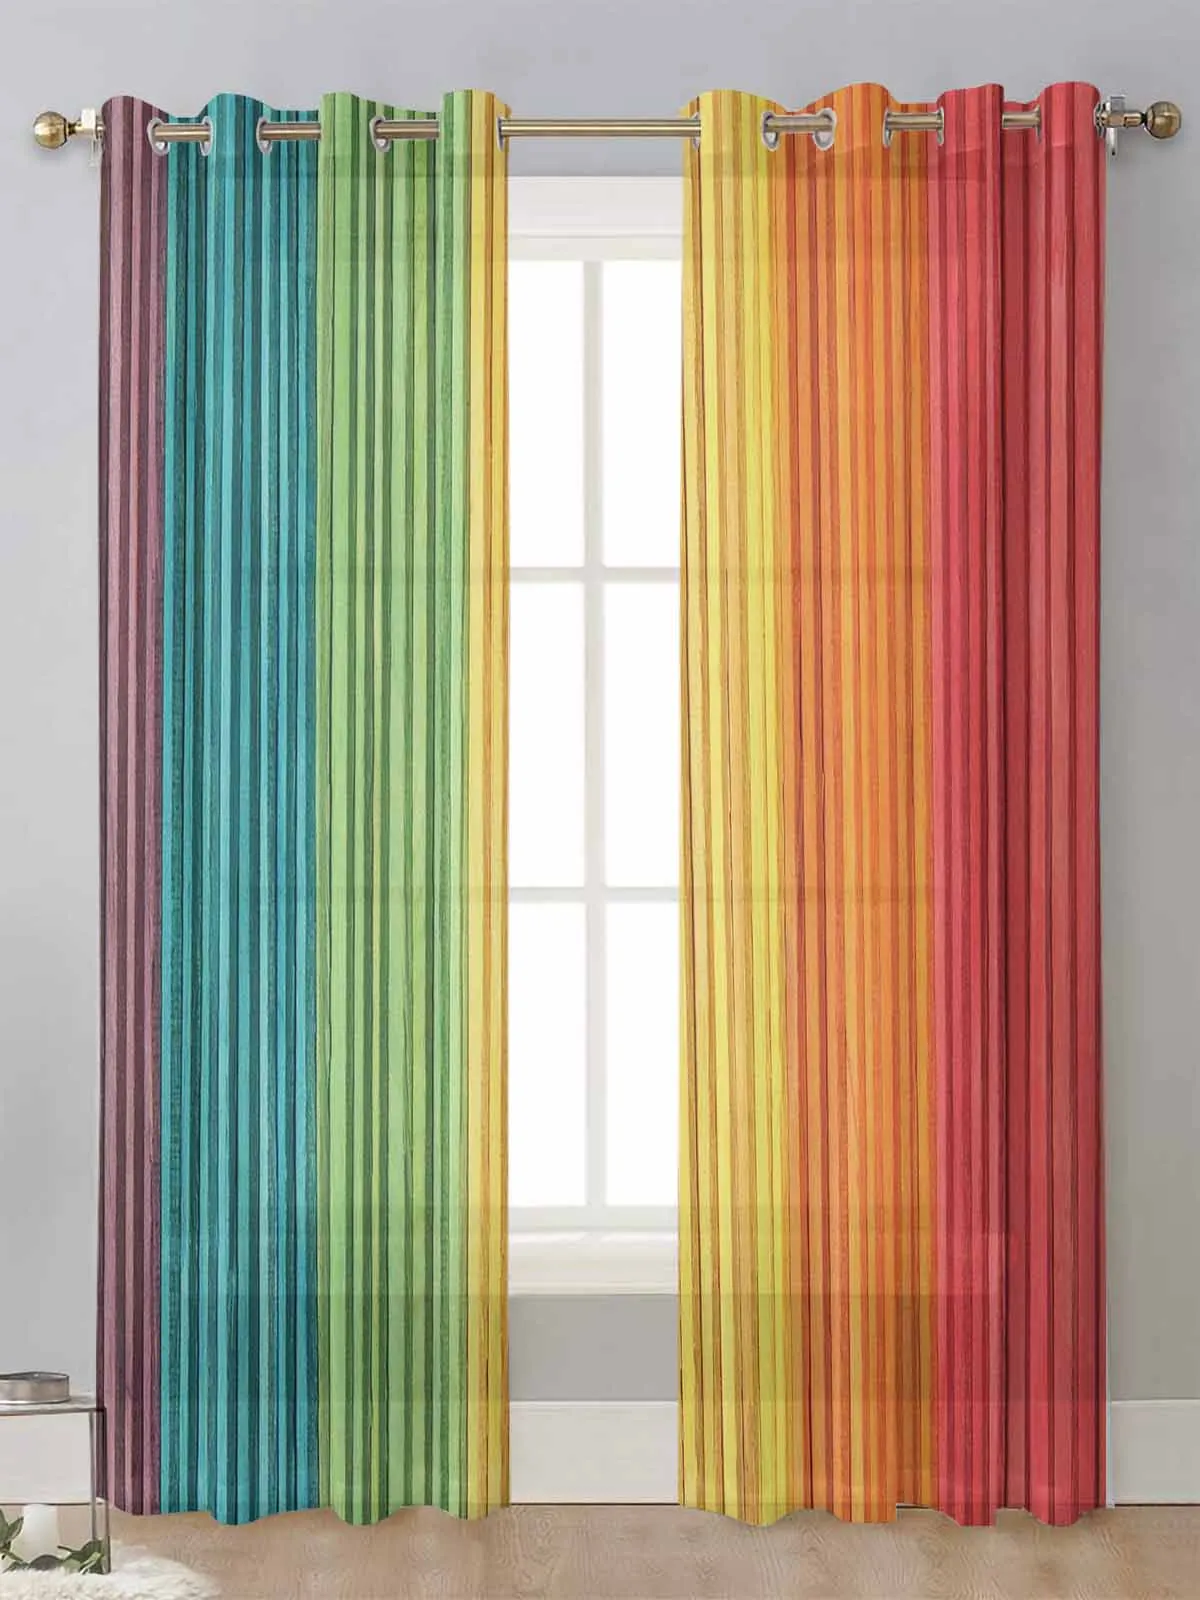 

Rainbow Vintage Wood Grain Sheer Curtains For Living Room Window Transparent Voile Tulle Curtain Cortinas Drapes Home Decor